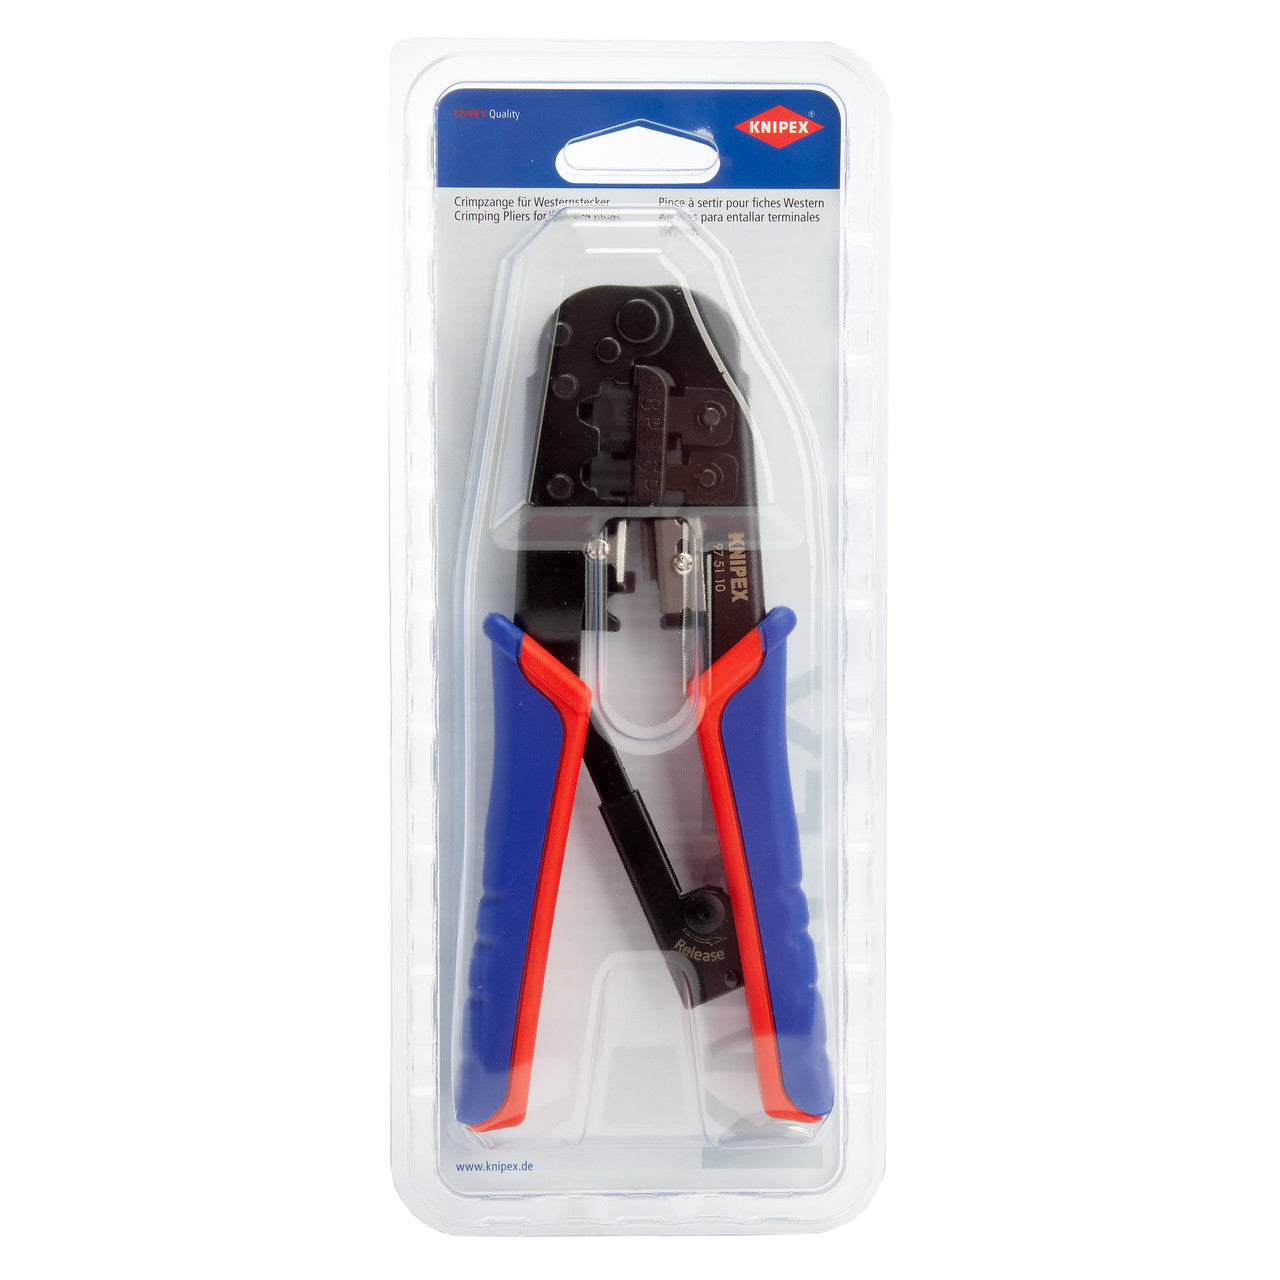 Knipex 975110SB Crimping Pliers for Western Plugs 190mm